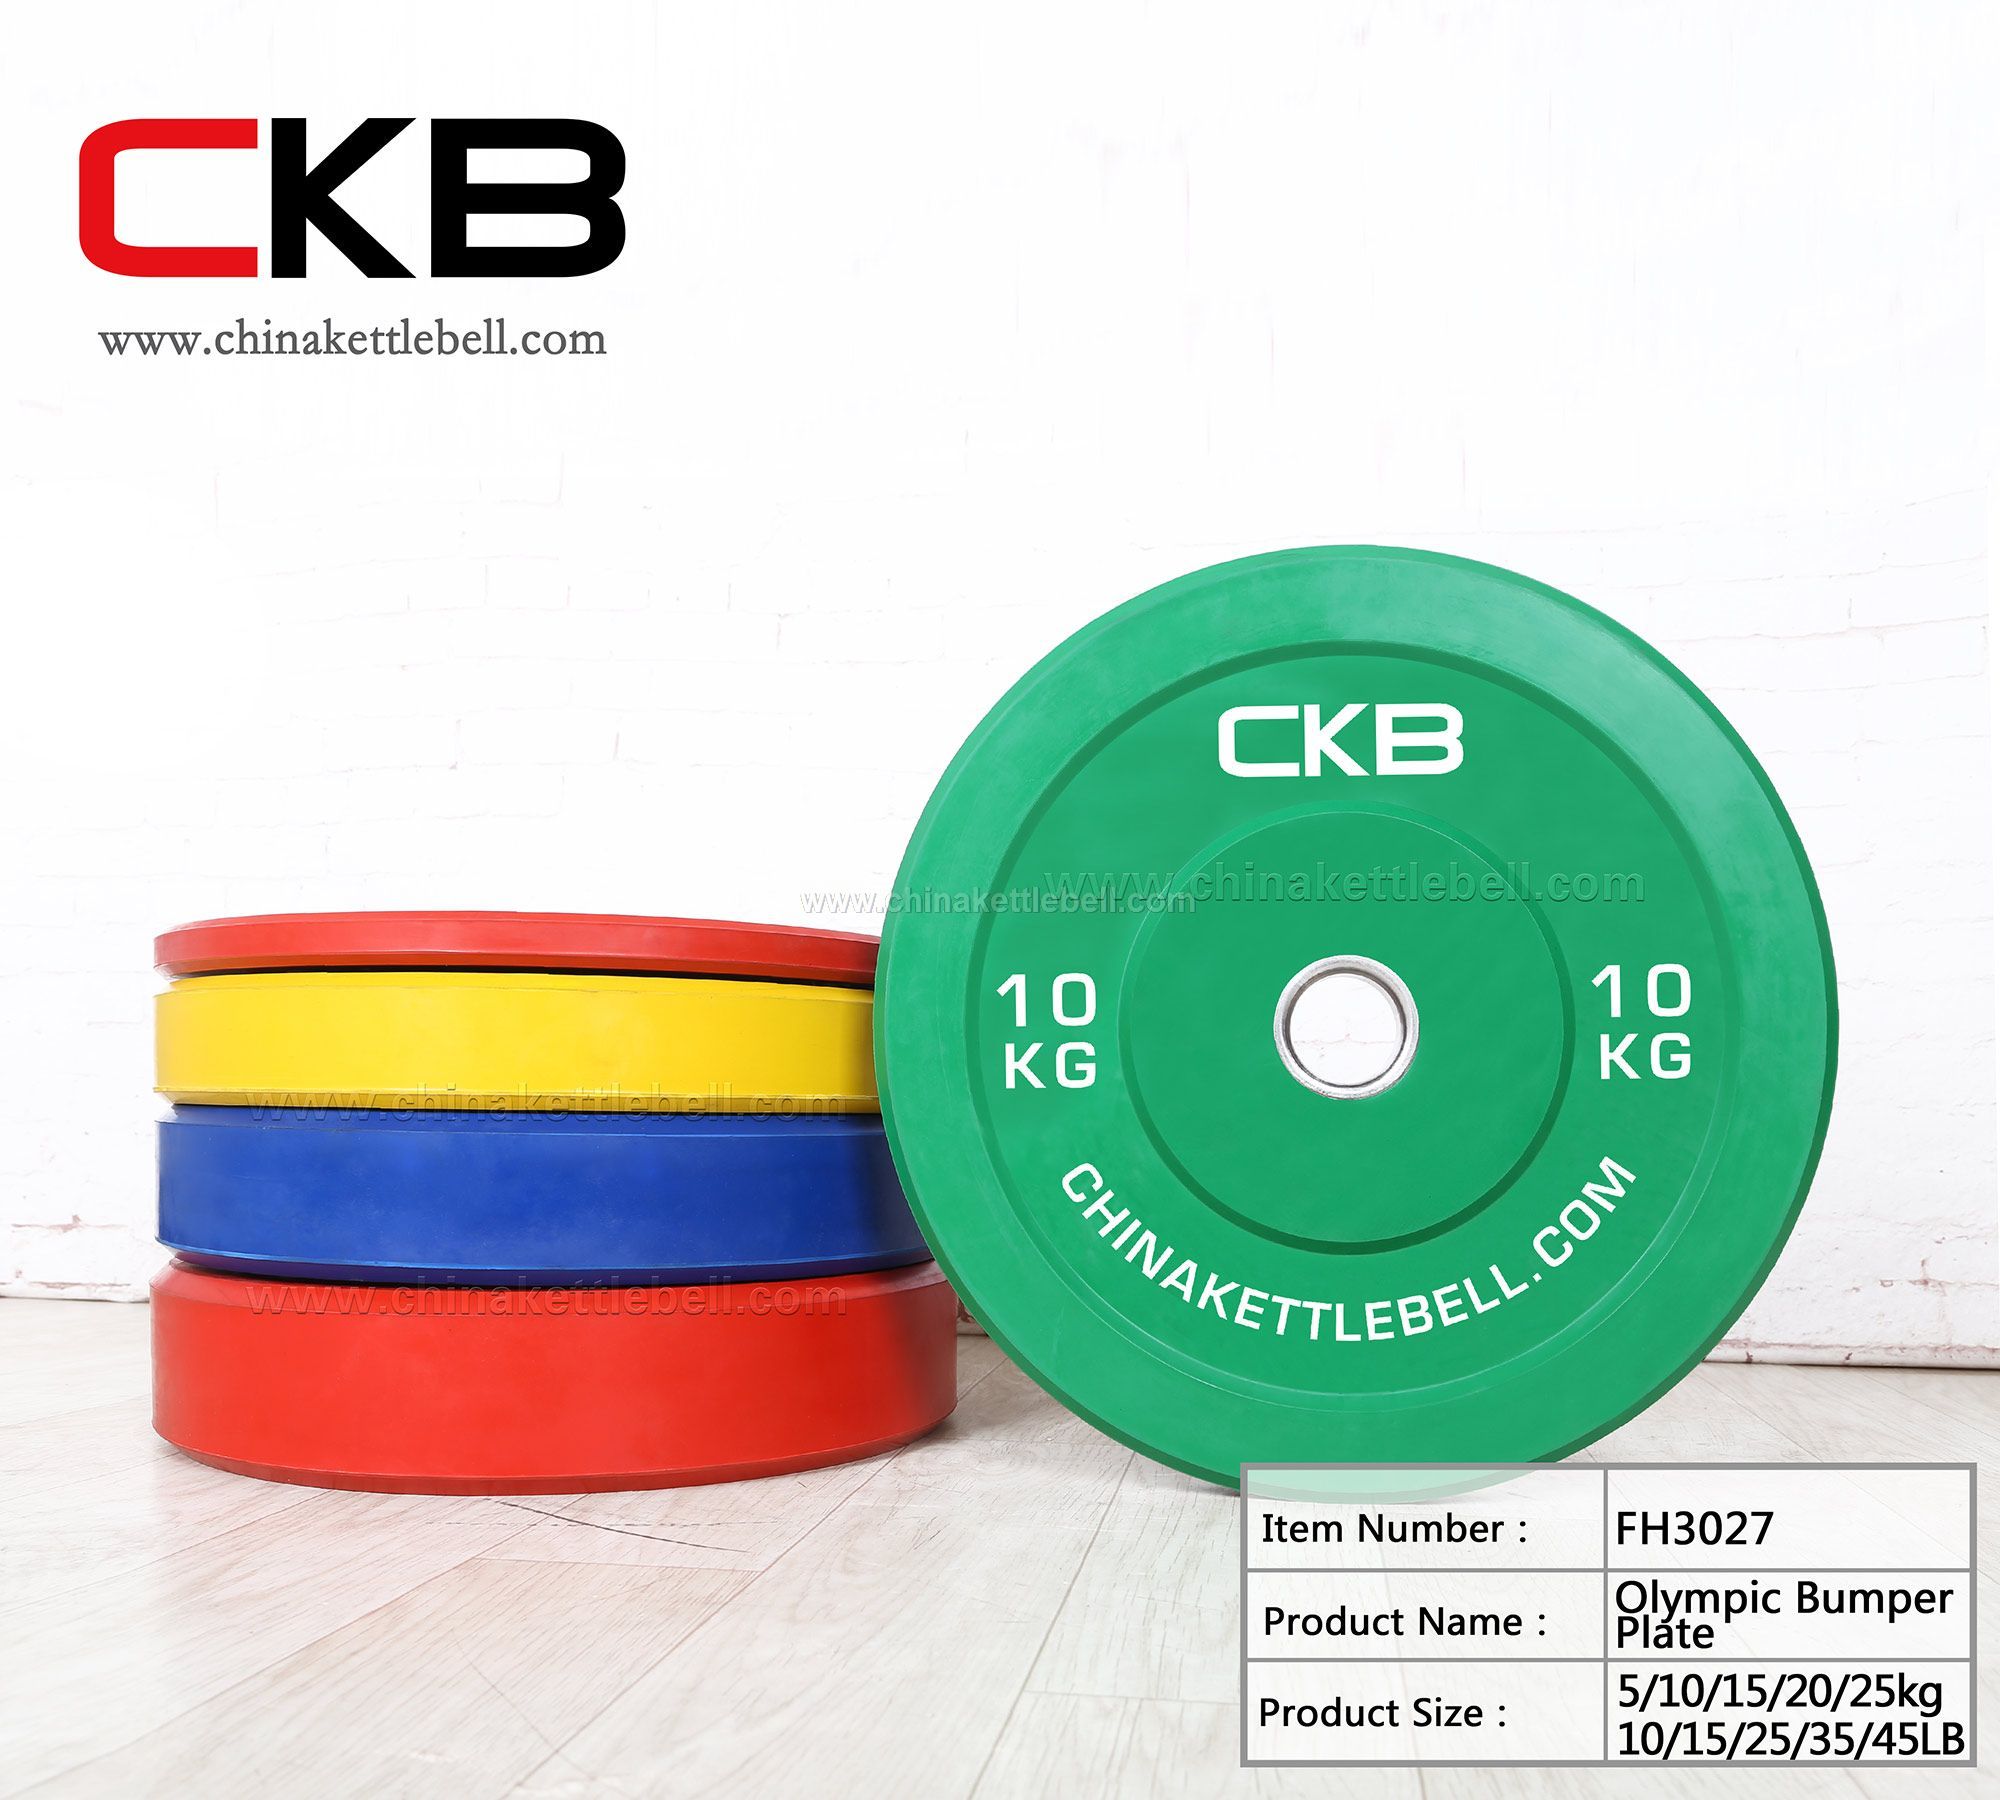 Olympic Bumper plate